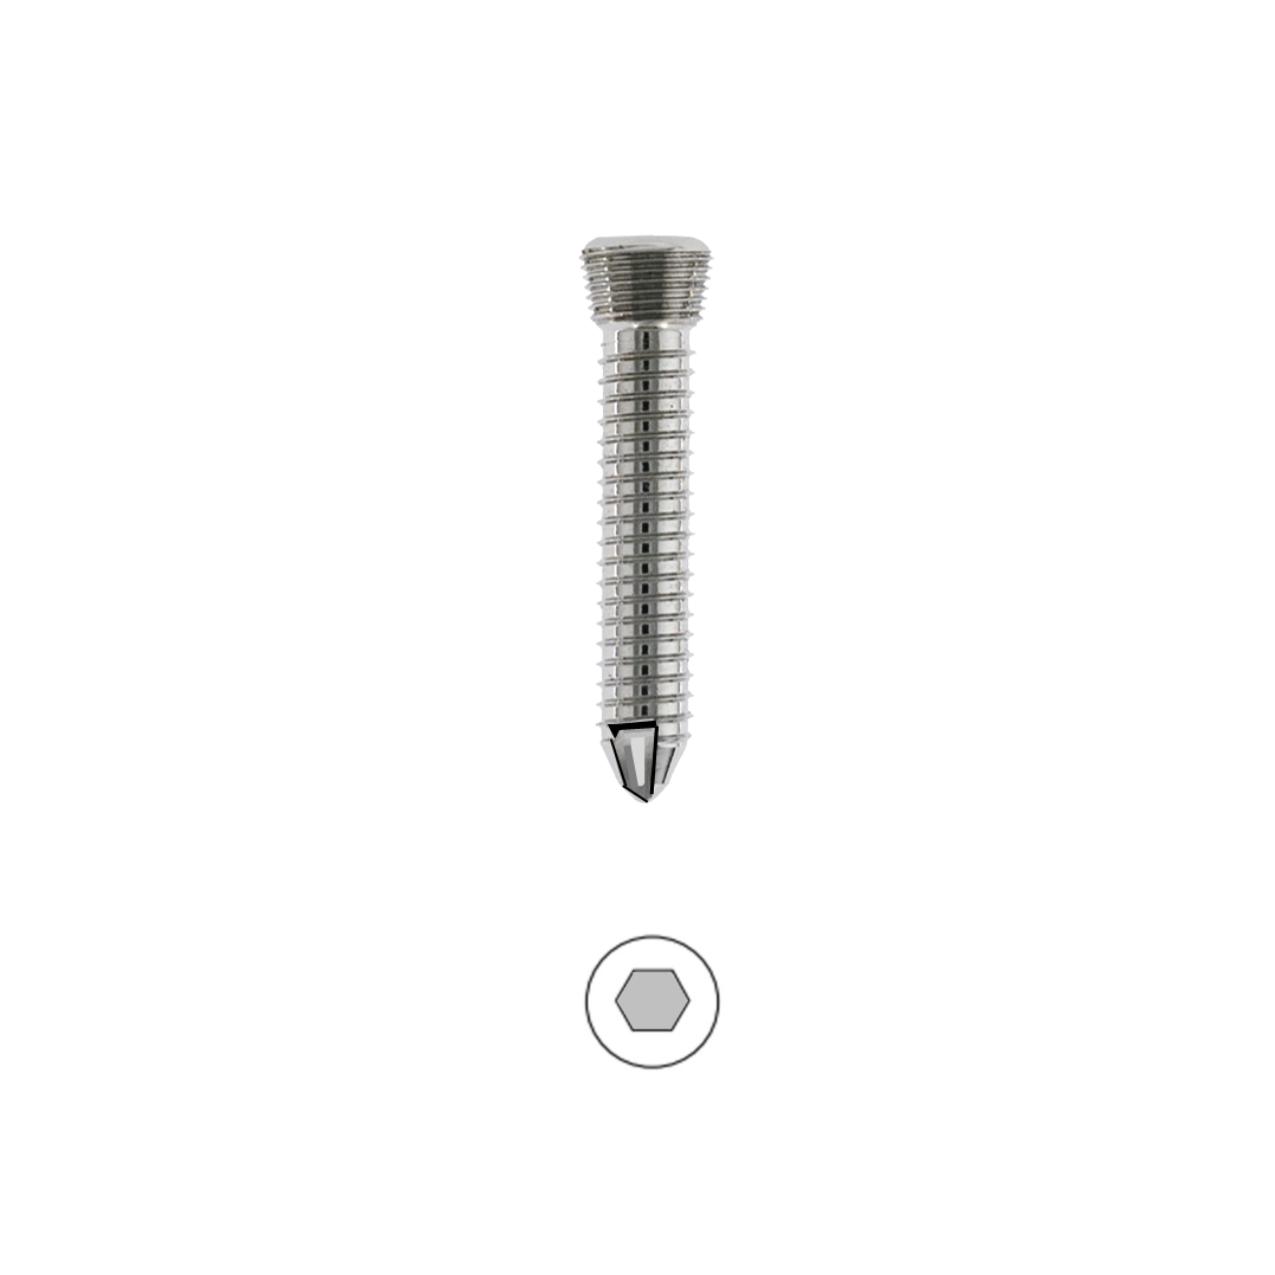 Locking Cortical Screws, Self tapping 3.5mm - Concord Surgical